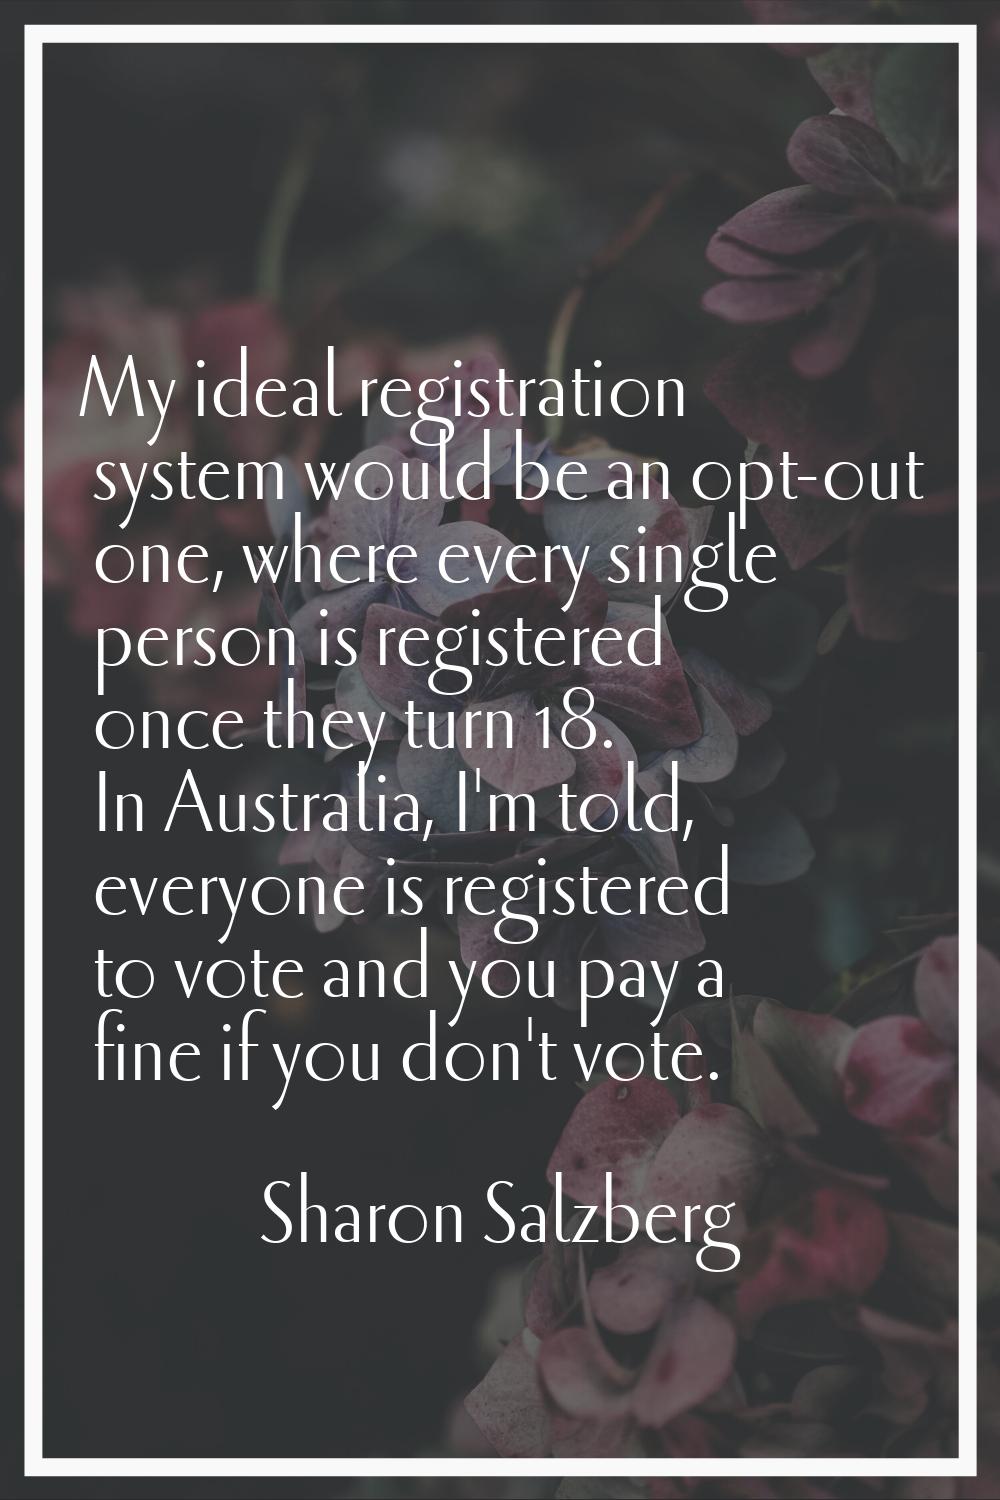 My ideal registration system would be an opt-out one, where every single person is registered once 